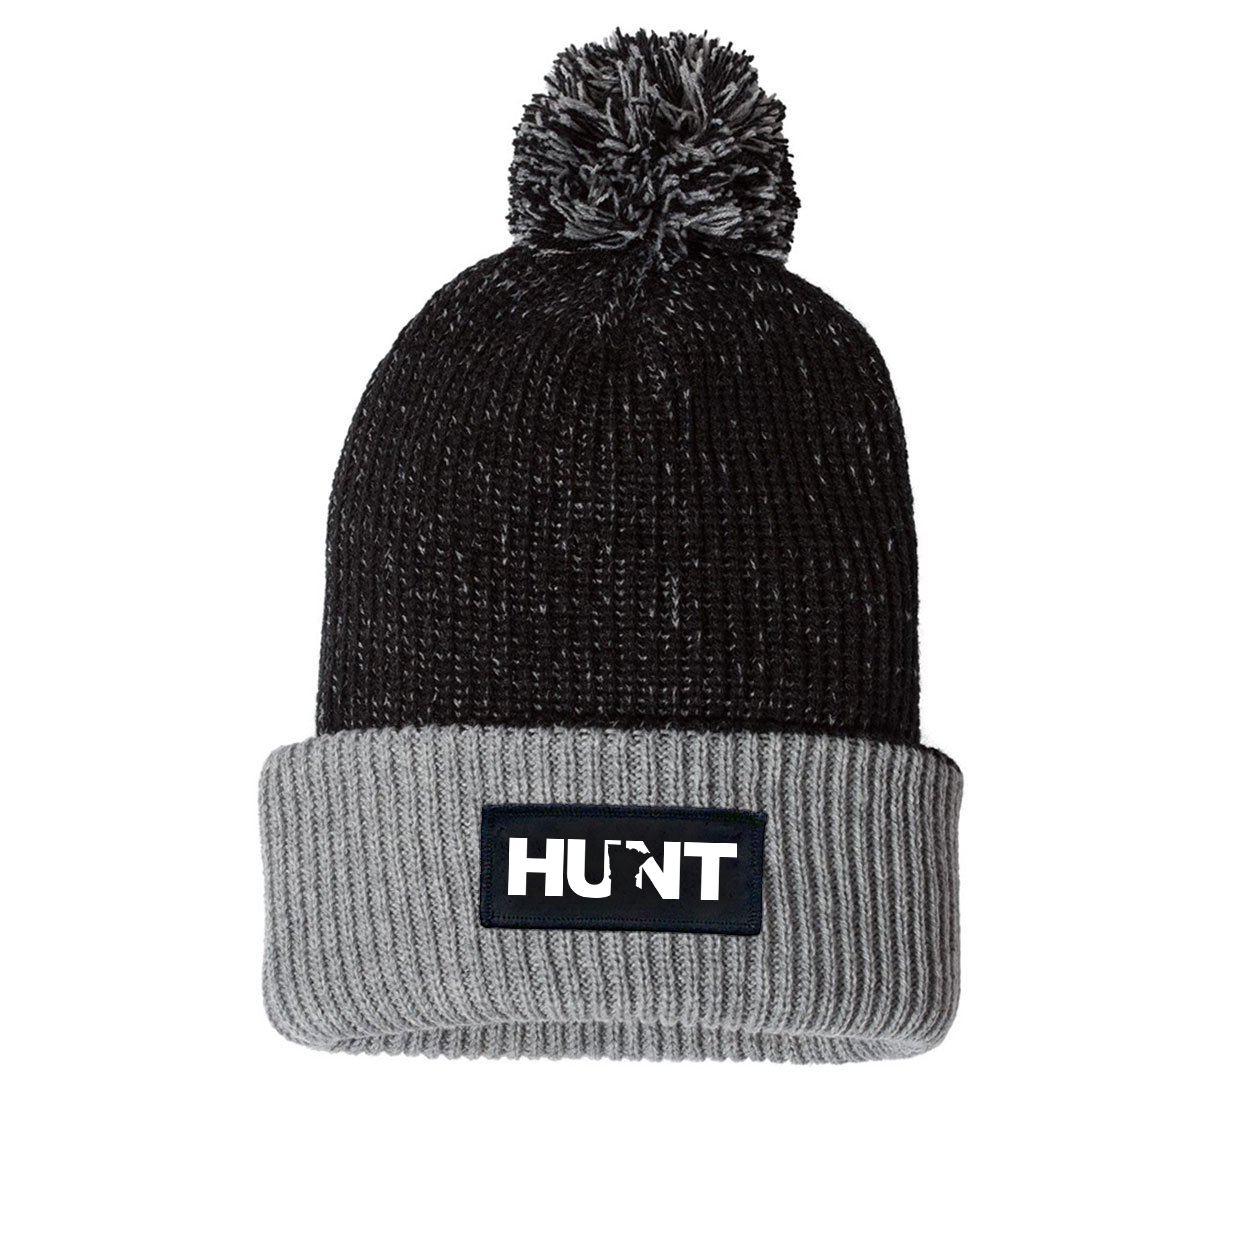 Hunt Minnesota Night Out Woven Patch Roll Up Pom Knit Beanie Black/Gray (White Logo)